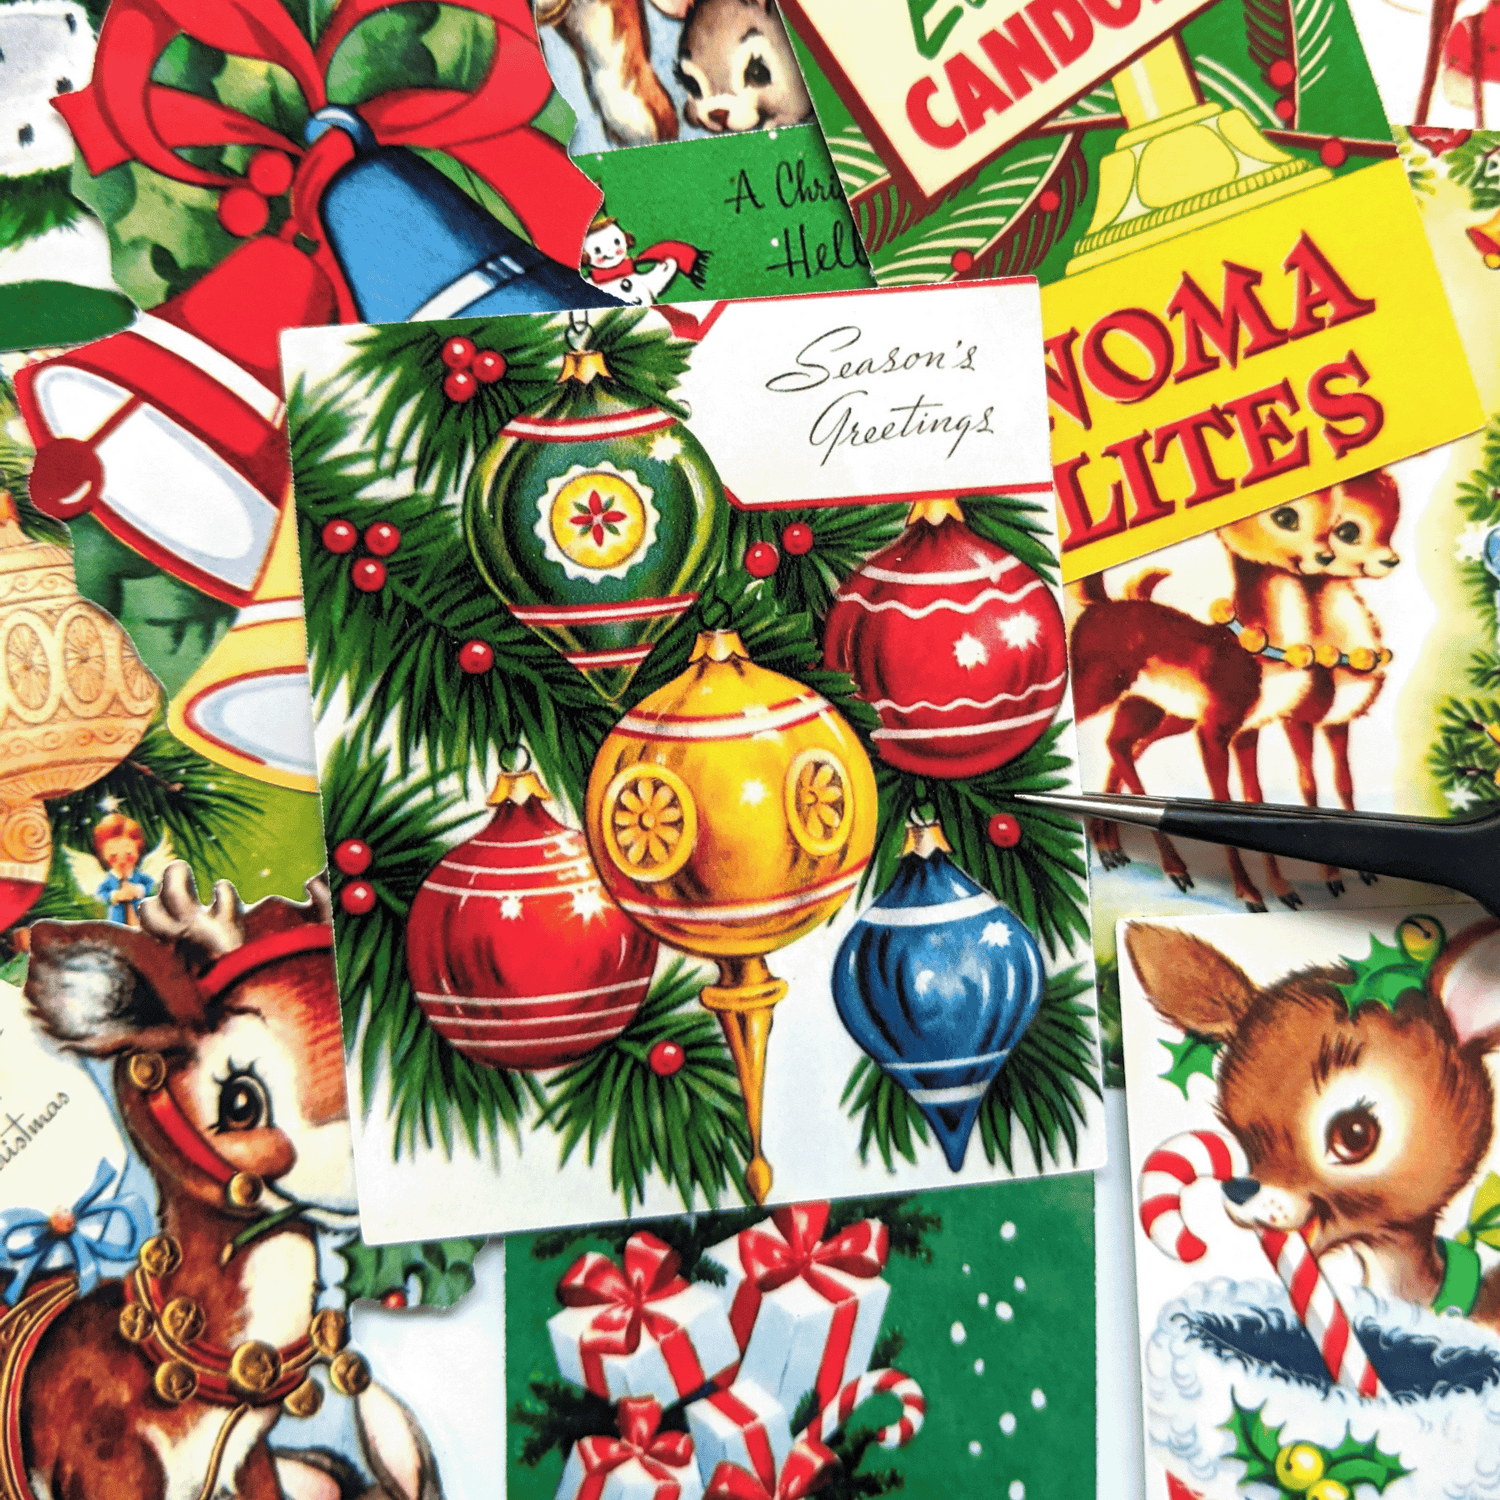 Vintage Christmas Sticker Pack, Christmas Stickers